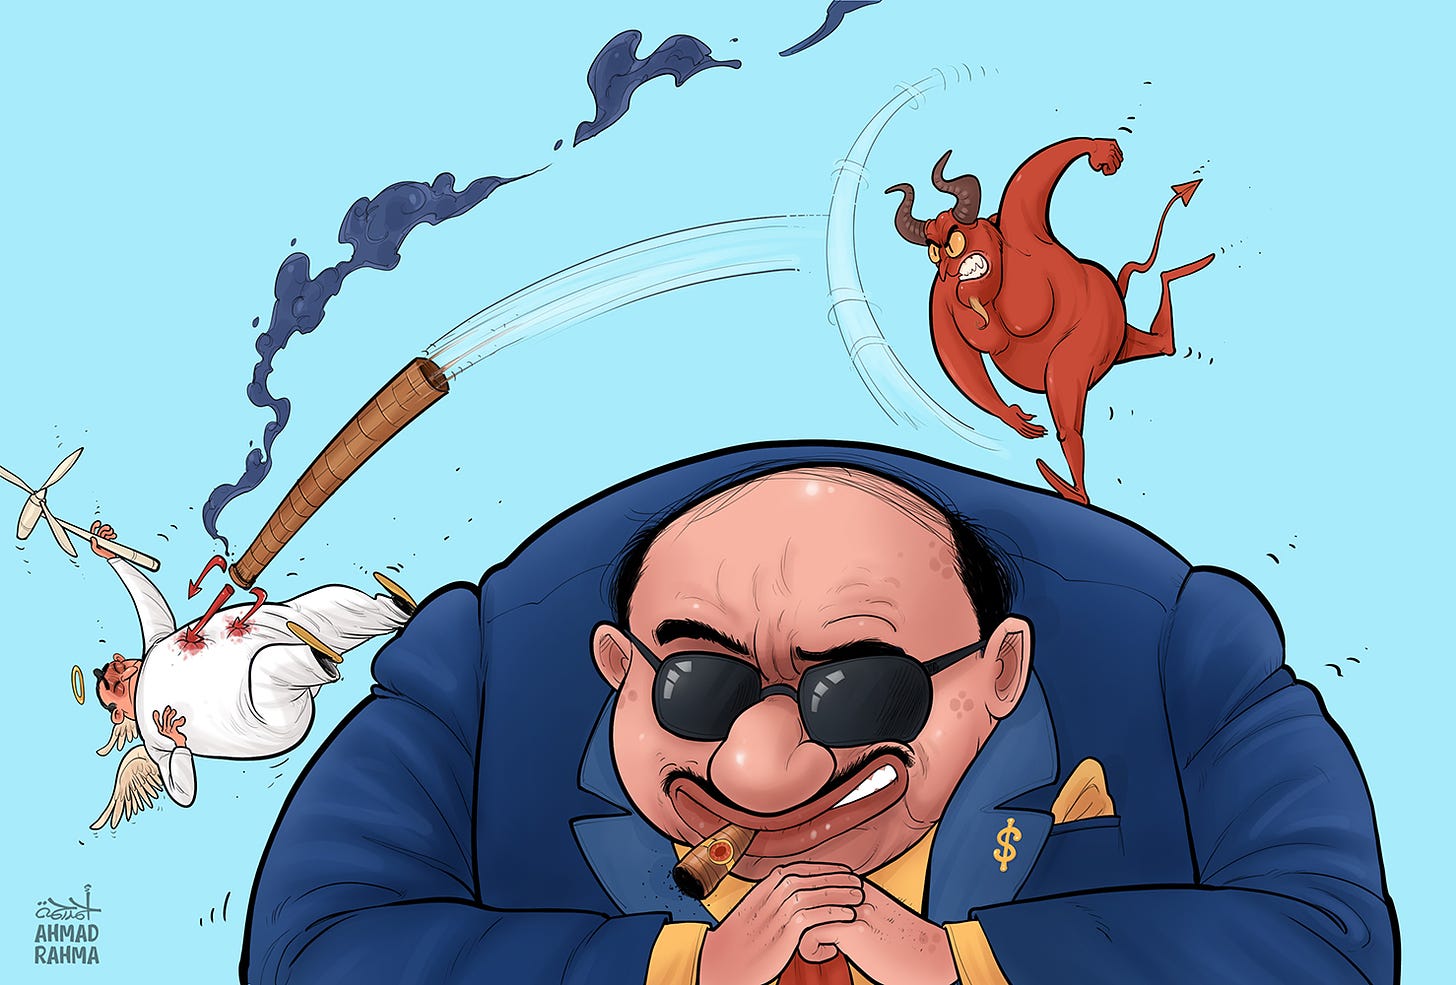 Cartoon showing a rich business man. On his right shoulder, a devil is throwing a trident shaped like a smoking chimney into the heart of an angel on his left shoulder, who is carrying a wind turbine as a staff.